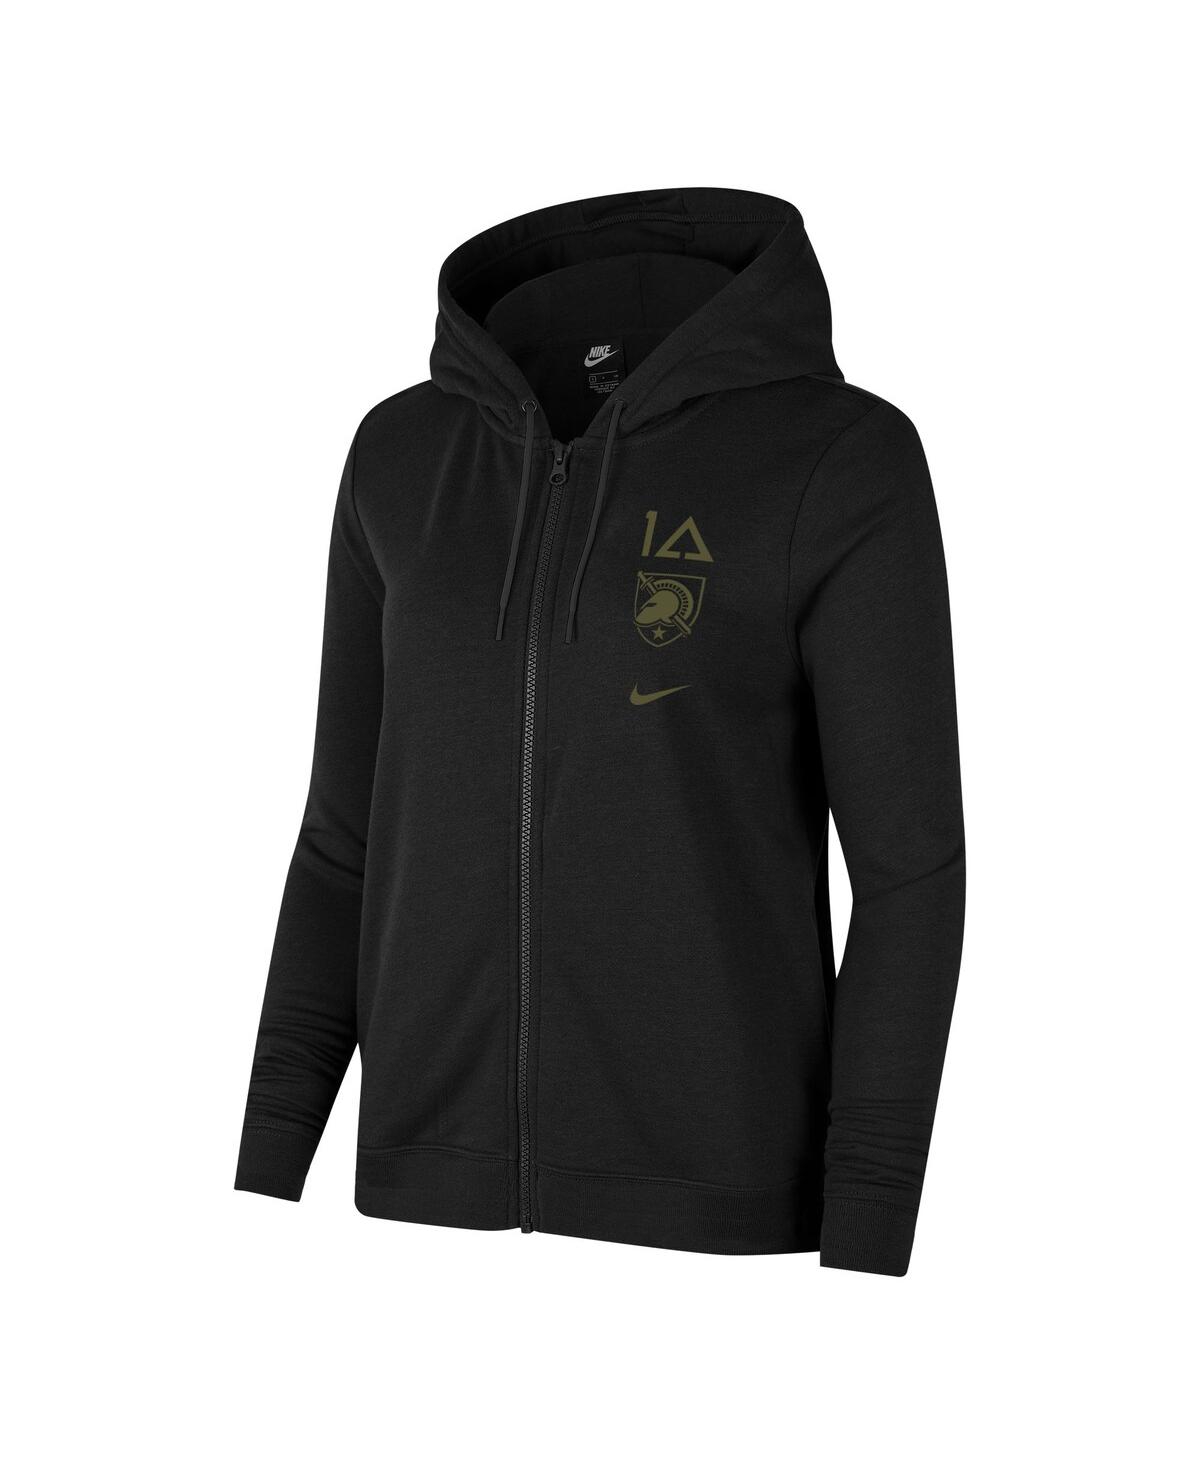 Shop Nike Women's  Black Army Black Knights 1st Armored Division Old Ironsides Operation Torch Full-zip Ho